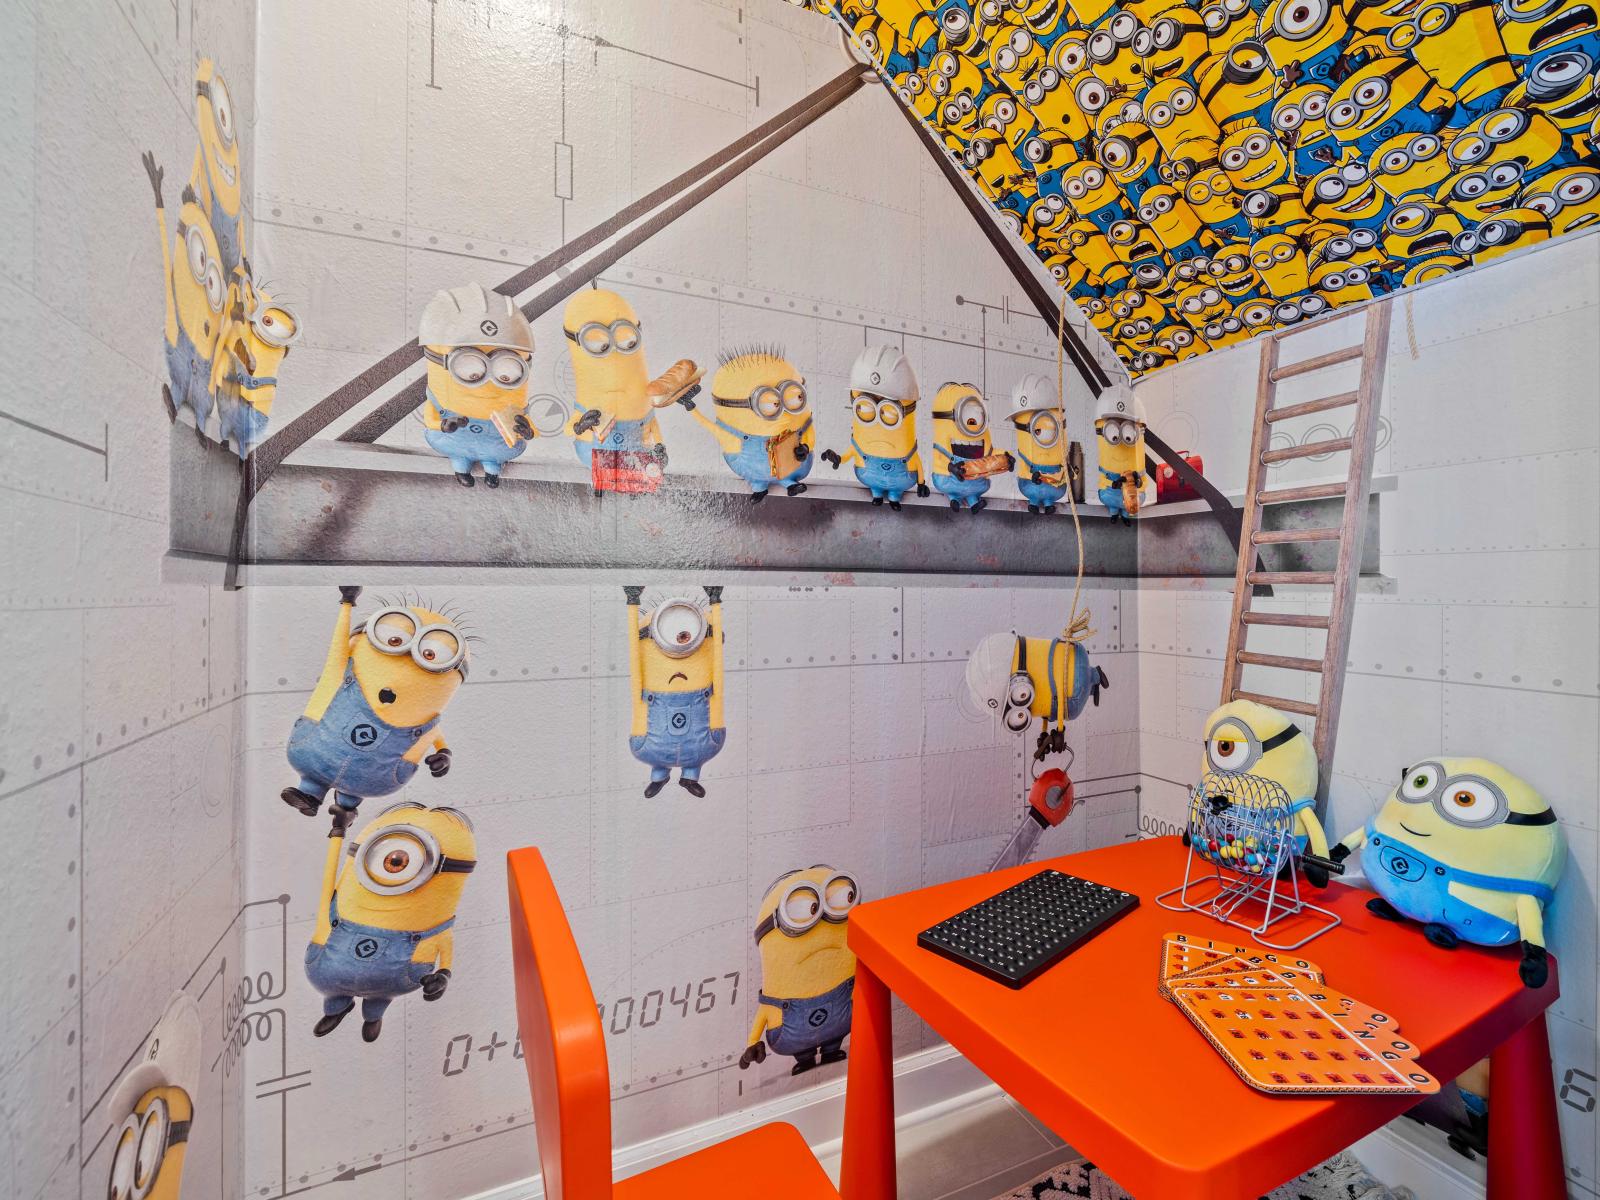 Minions Themed Play Room of the Home in Davenport Florida - Let the mischief begin in Minions-themed playroom - Small space bursting with fun and laughter for little ones